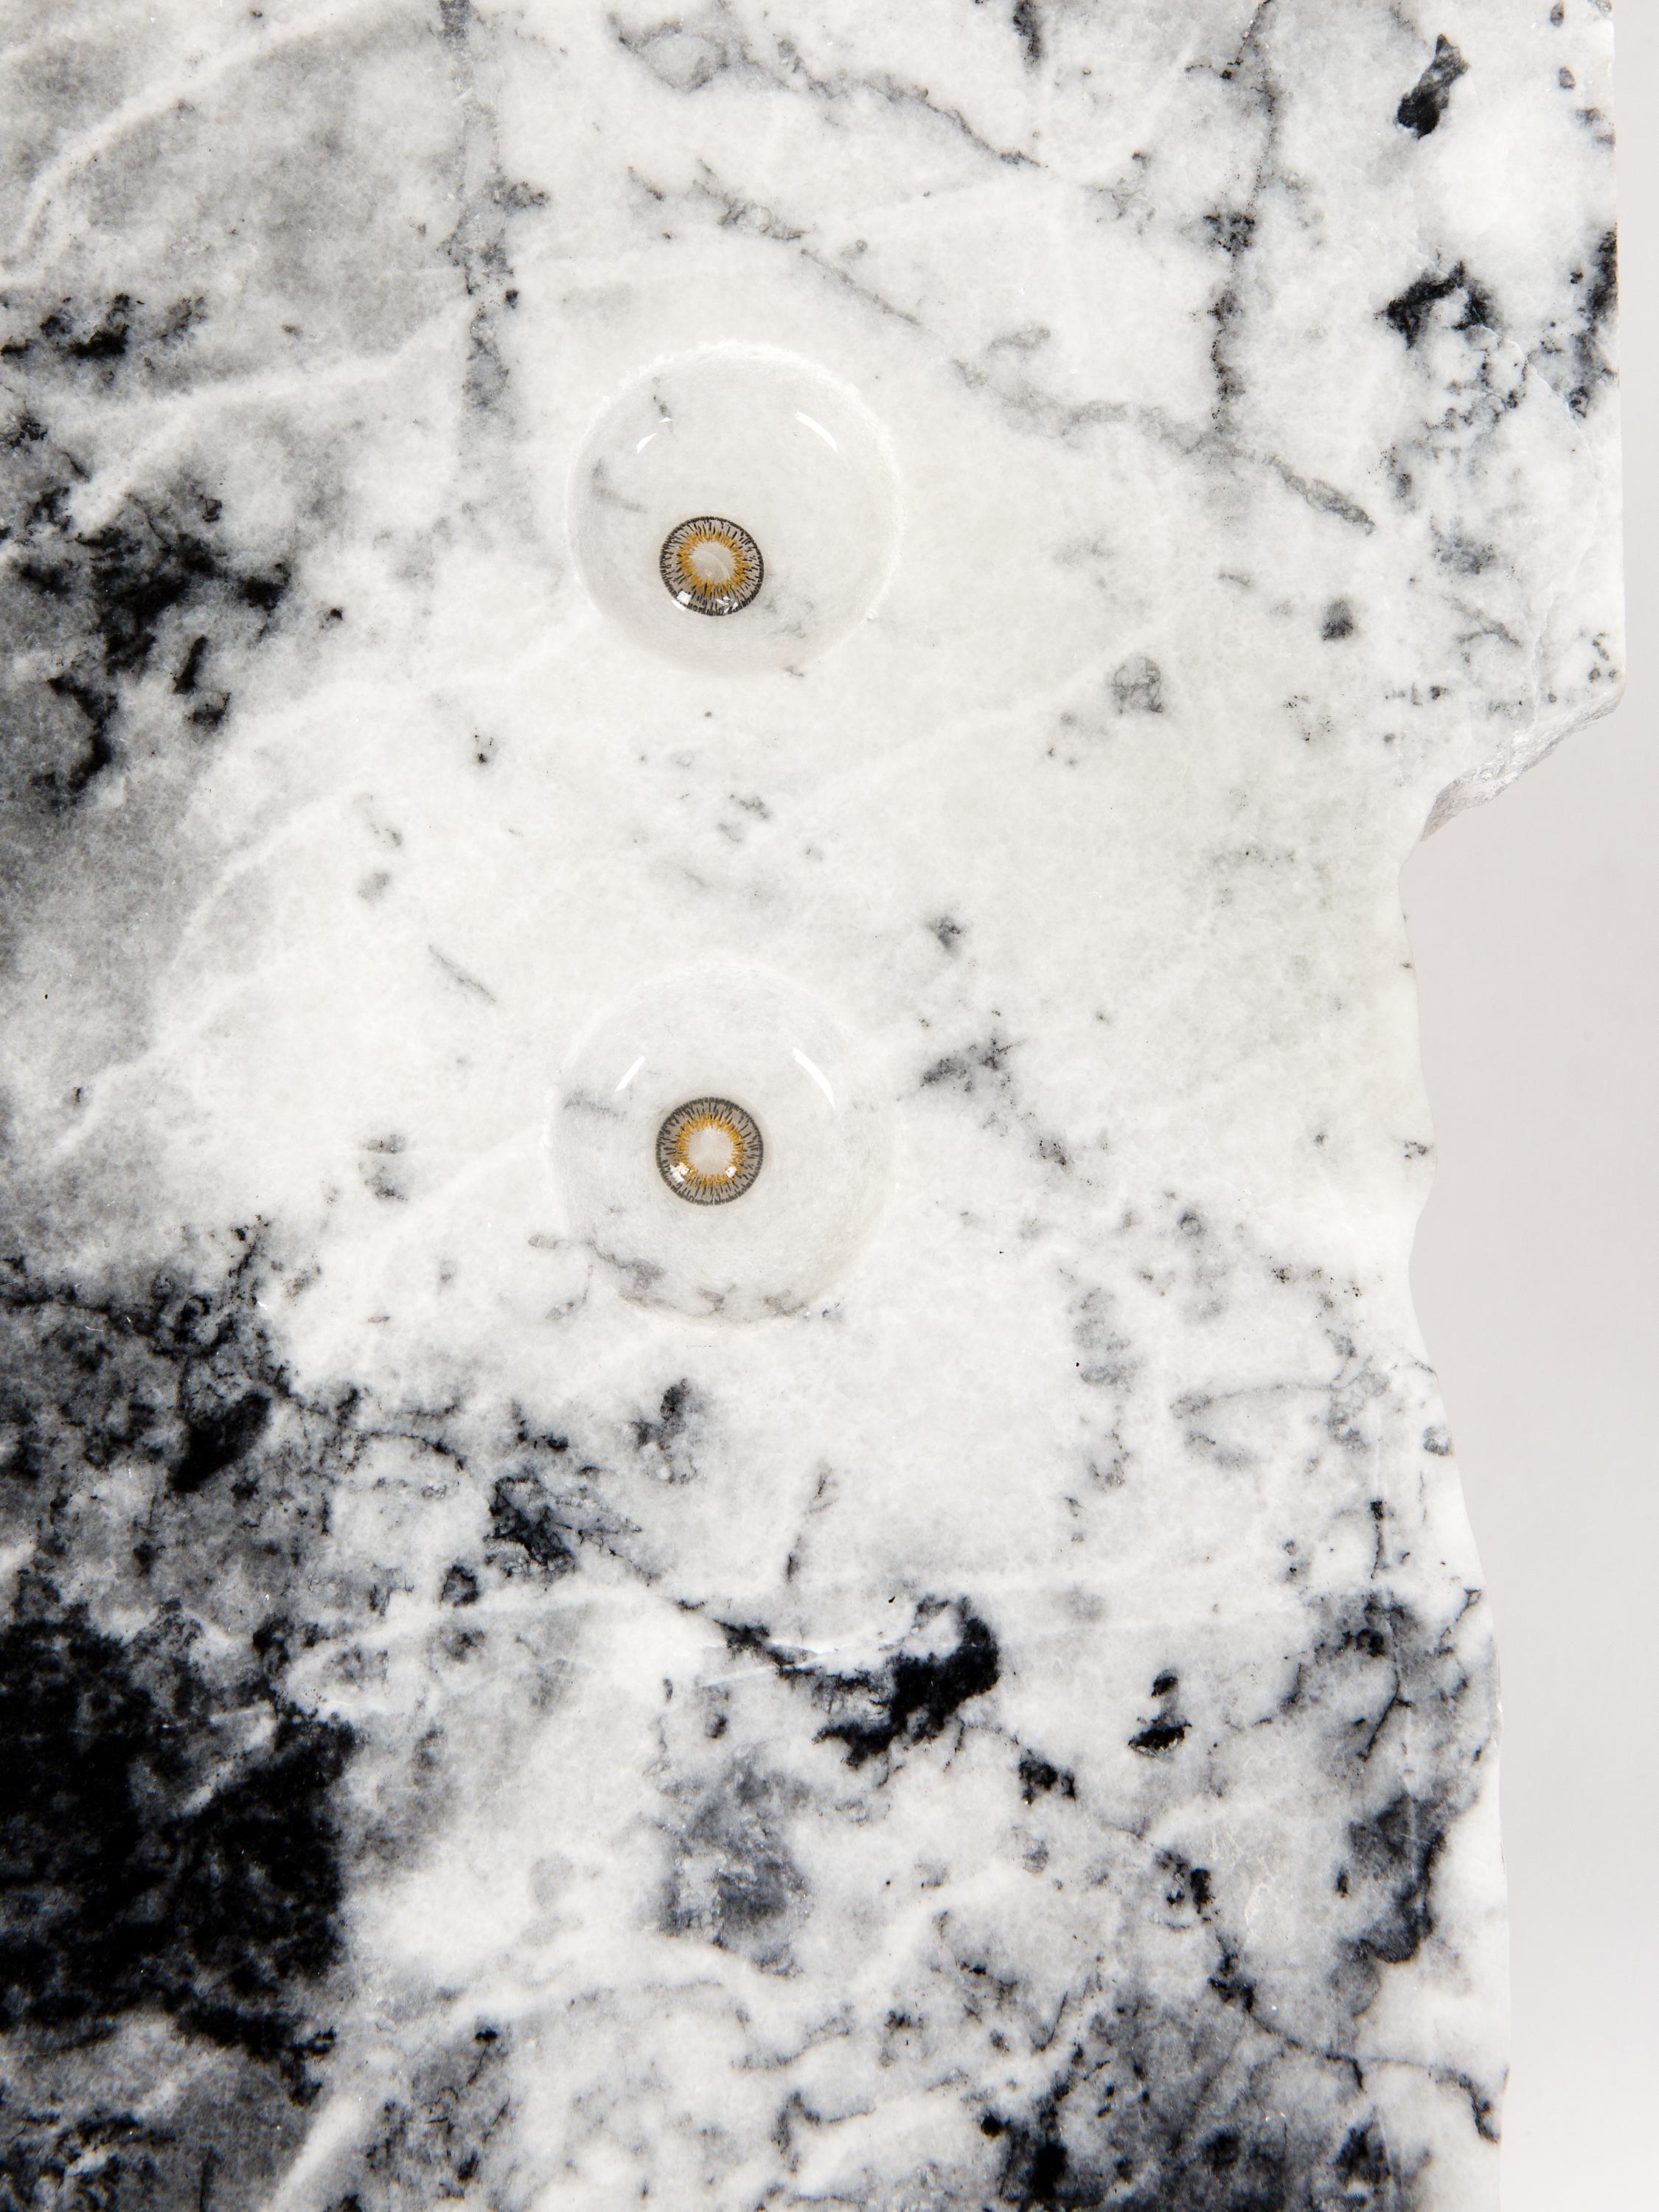 Two contact lenses with brown and orange irises and clear edges sit side by side on a piece of black-and-white marble.